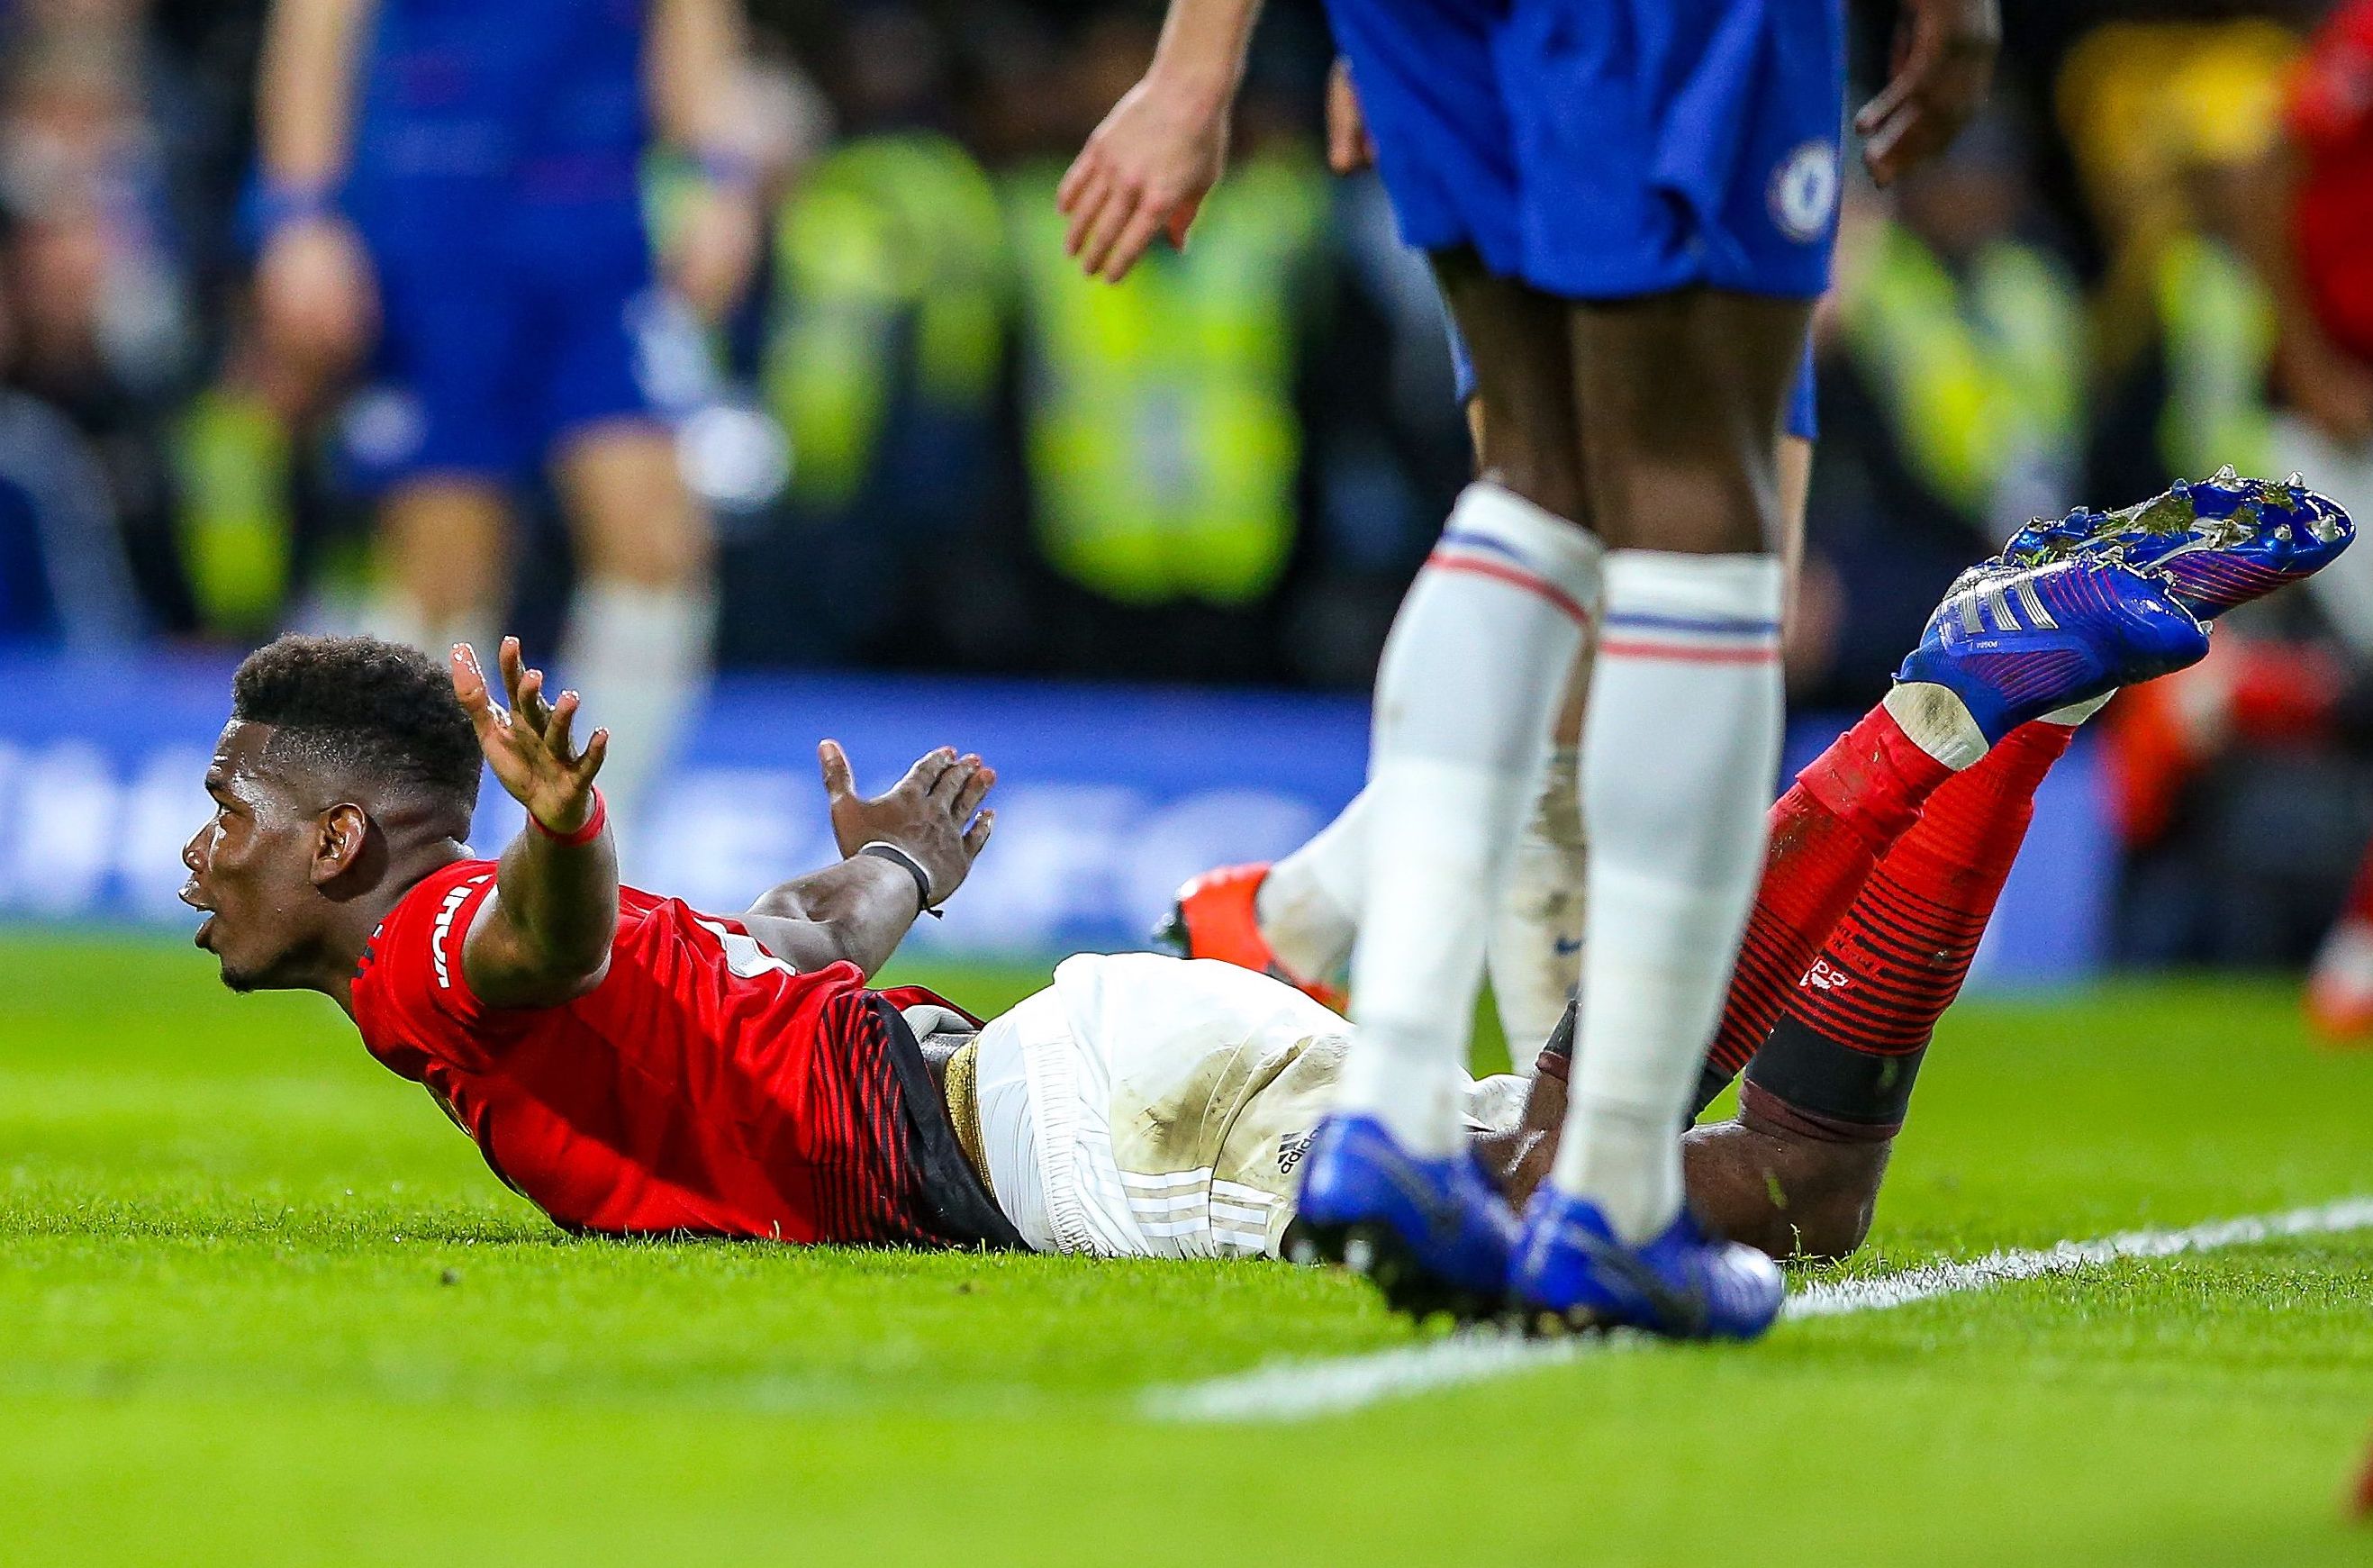 Match Report: Ruthless United beat Chelsea 2-0